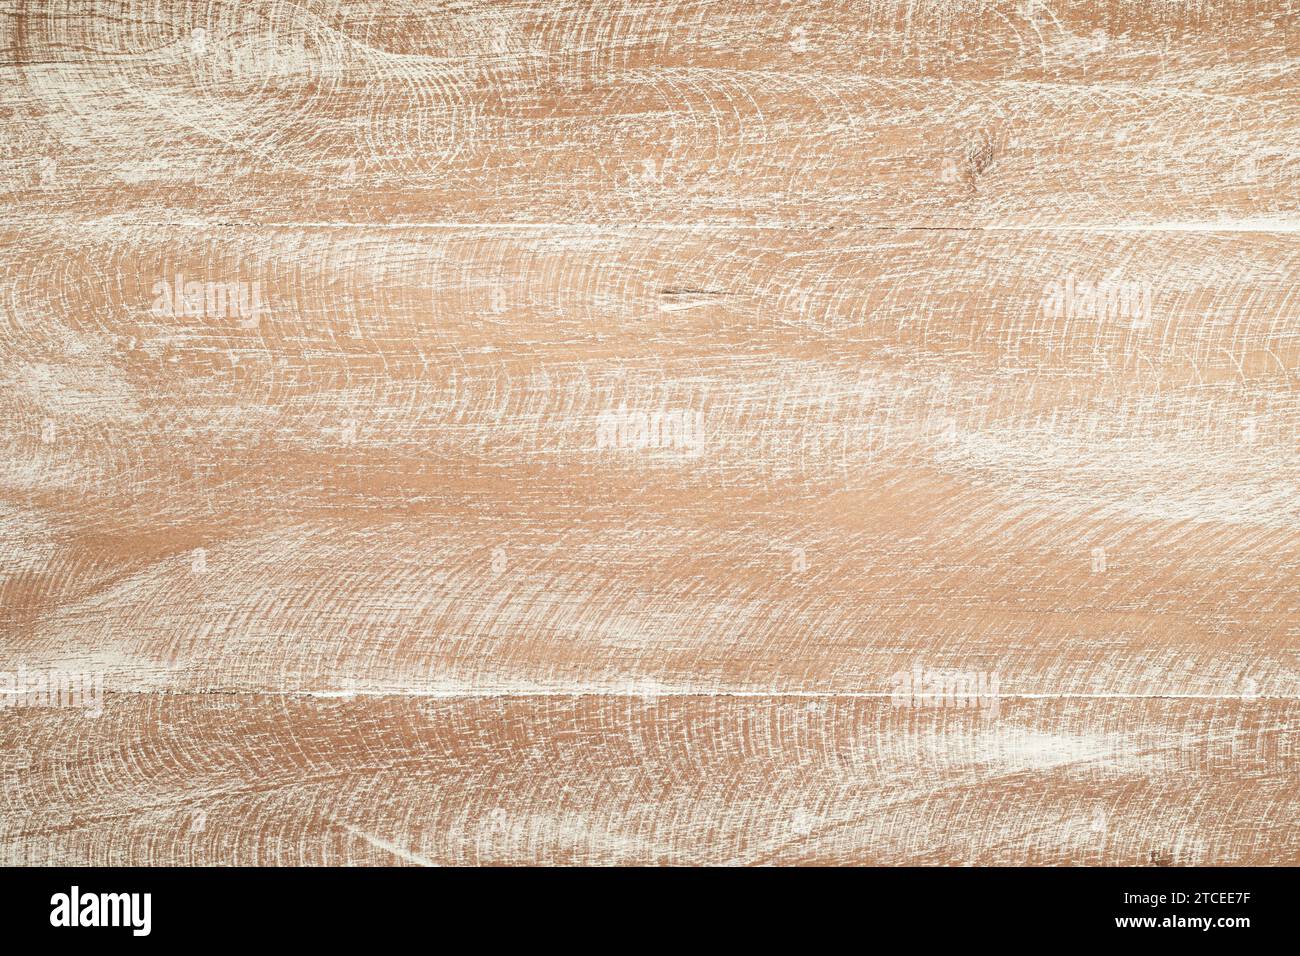 Rough Shabby Chic Texture. Wooden Background With White Paint Worn Off Stock Photo